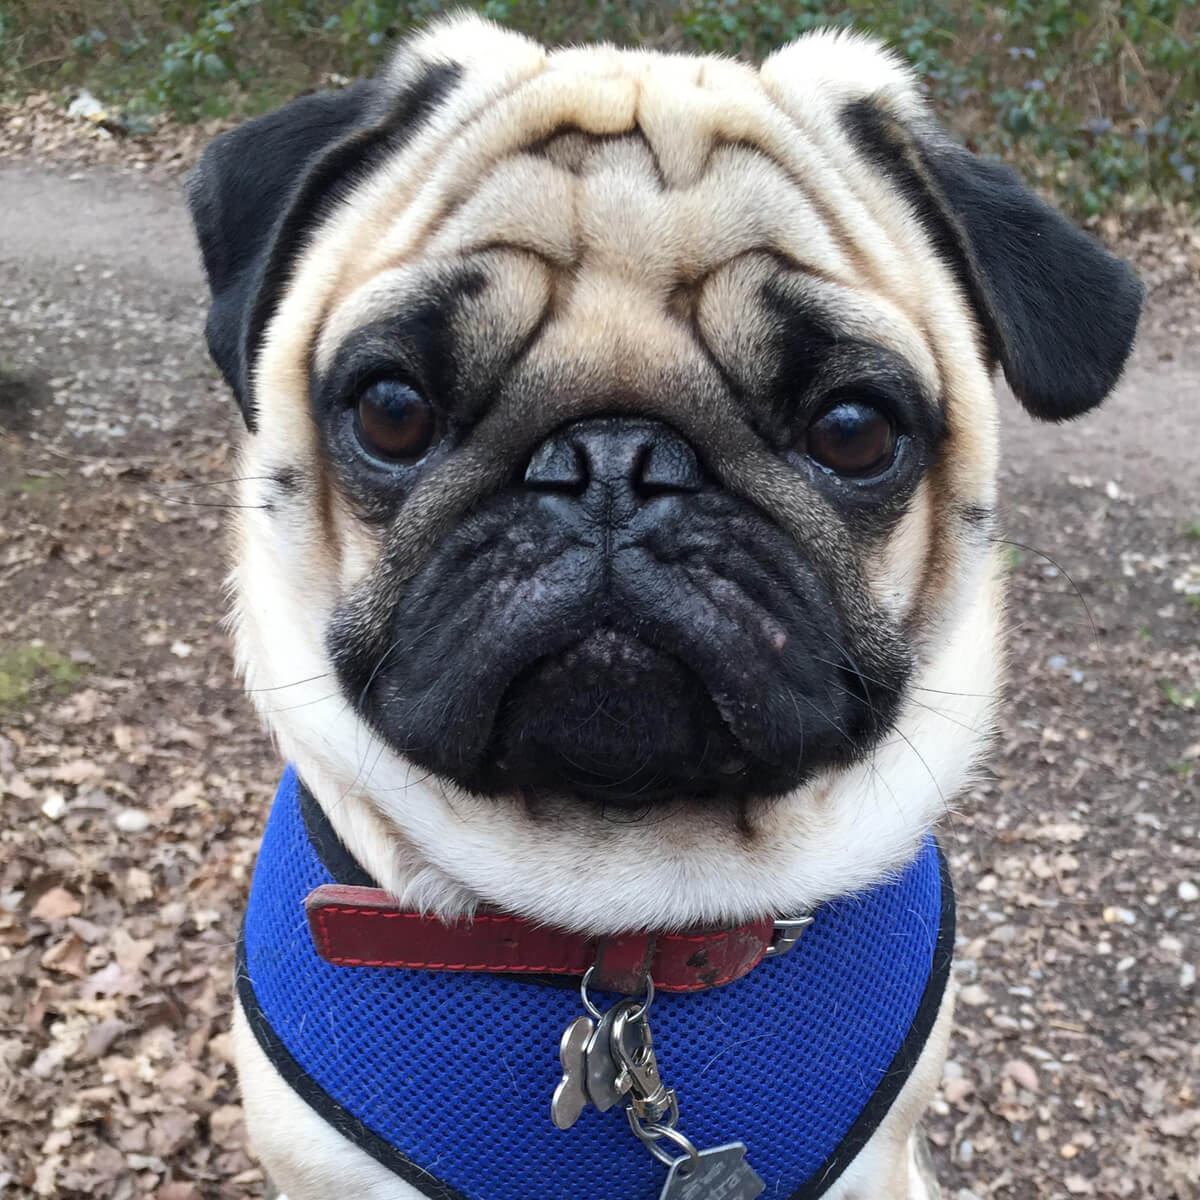 Angelo the pug looks straight at the camera